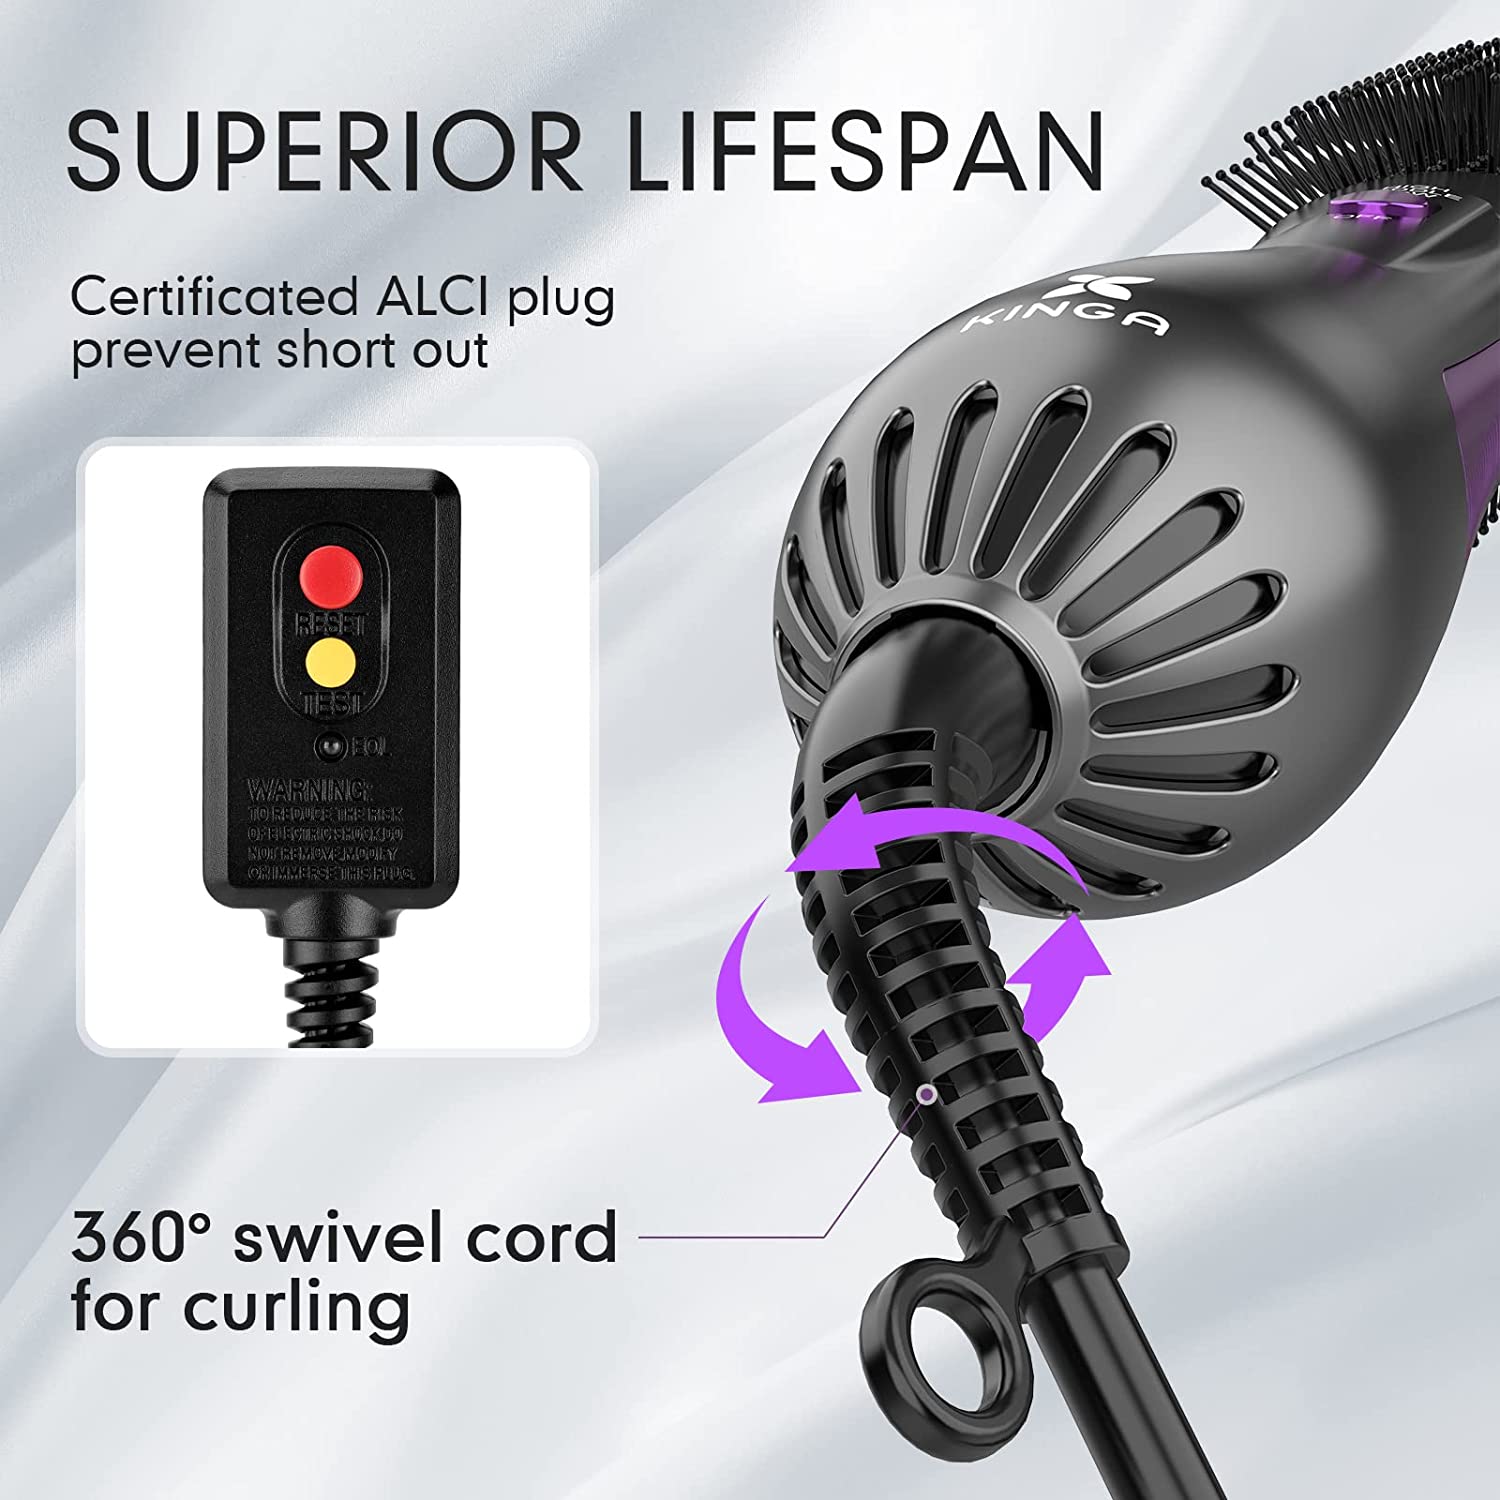 5 in 1 Step Hair Dryer Brush, with Negative Ion Anti-frizz